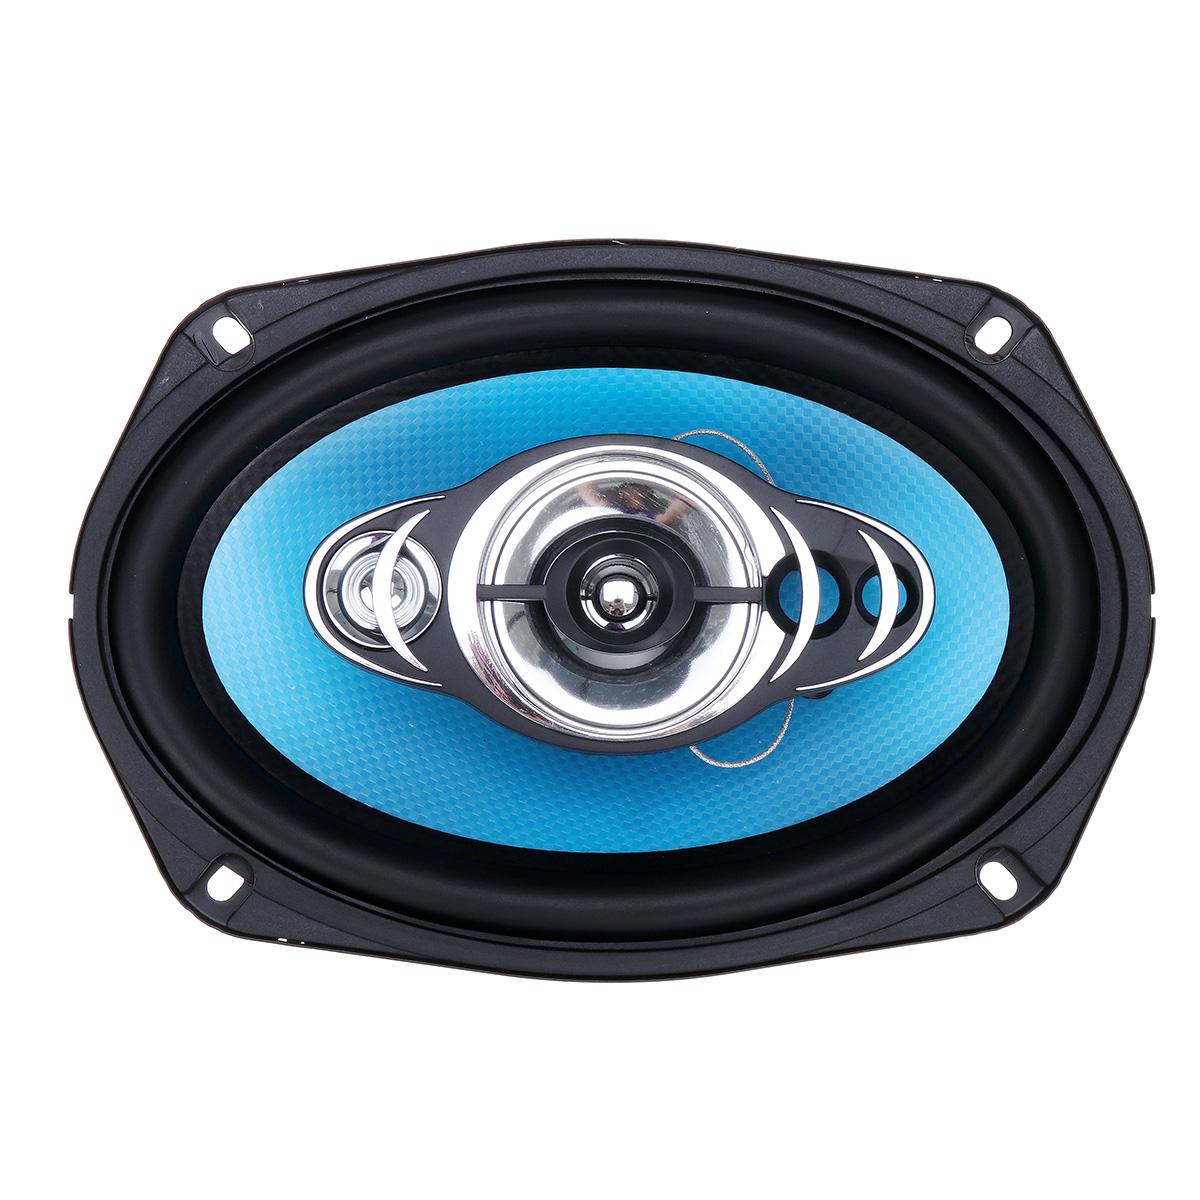 1pcs 6x9 inch 1000W 4 Way Car Speaker and Subwoofer HIFI Speaker Car Rear / Front Door Audio Music Stereo Coxial Speakers System